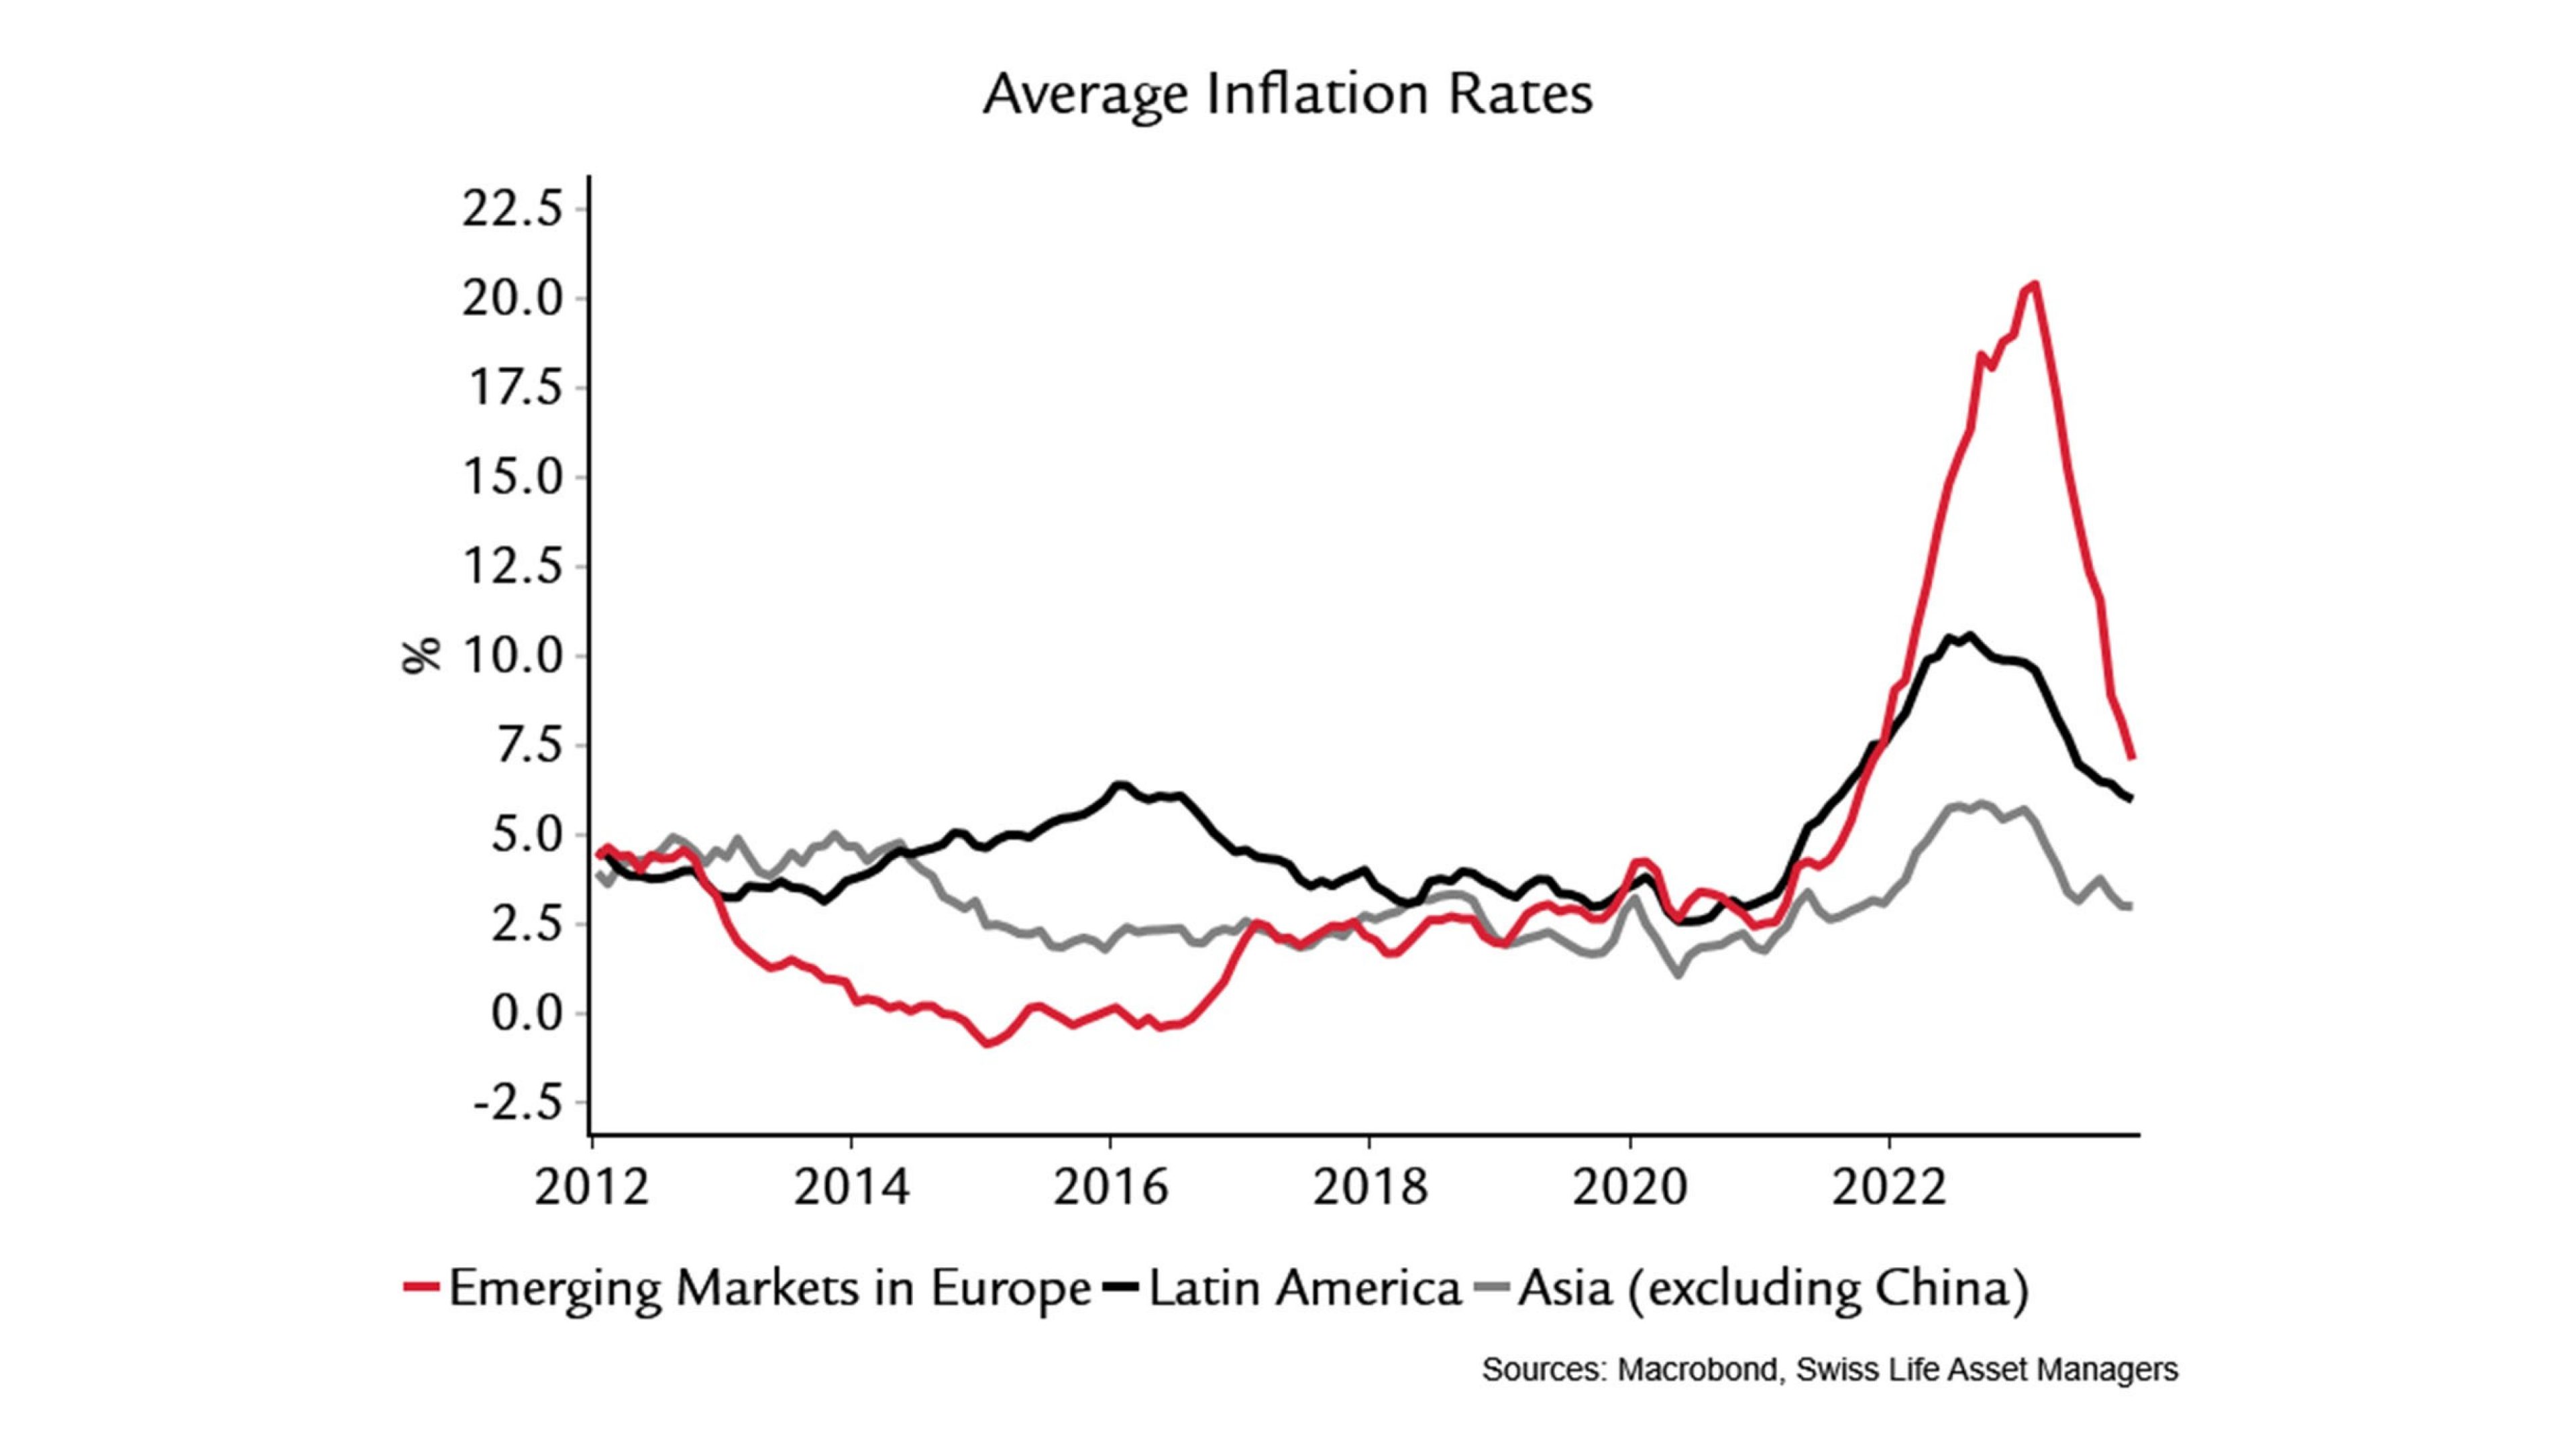 Graphic shows average inflation rates